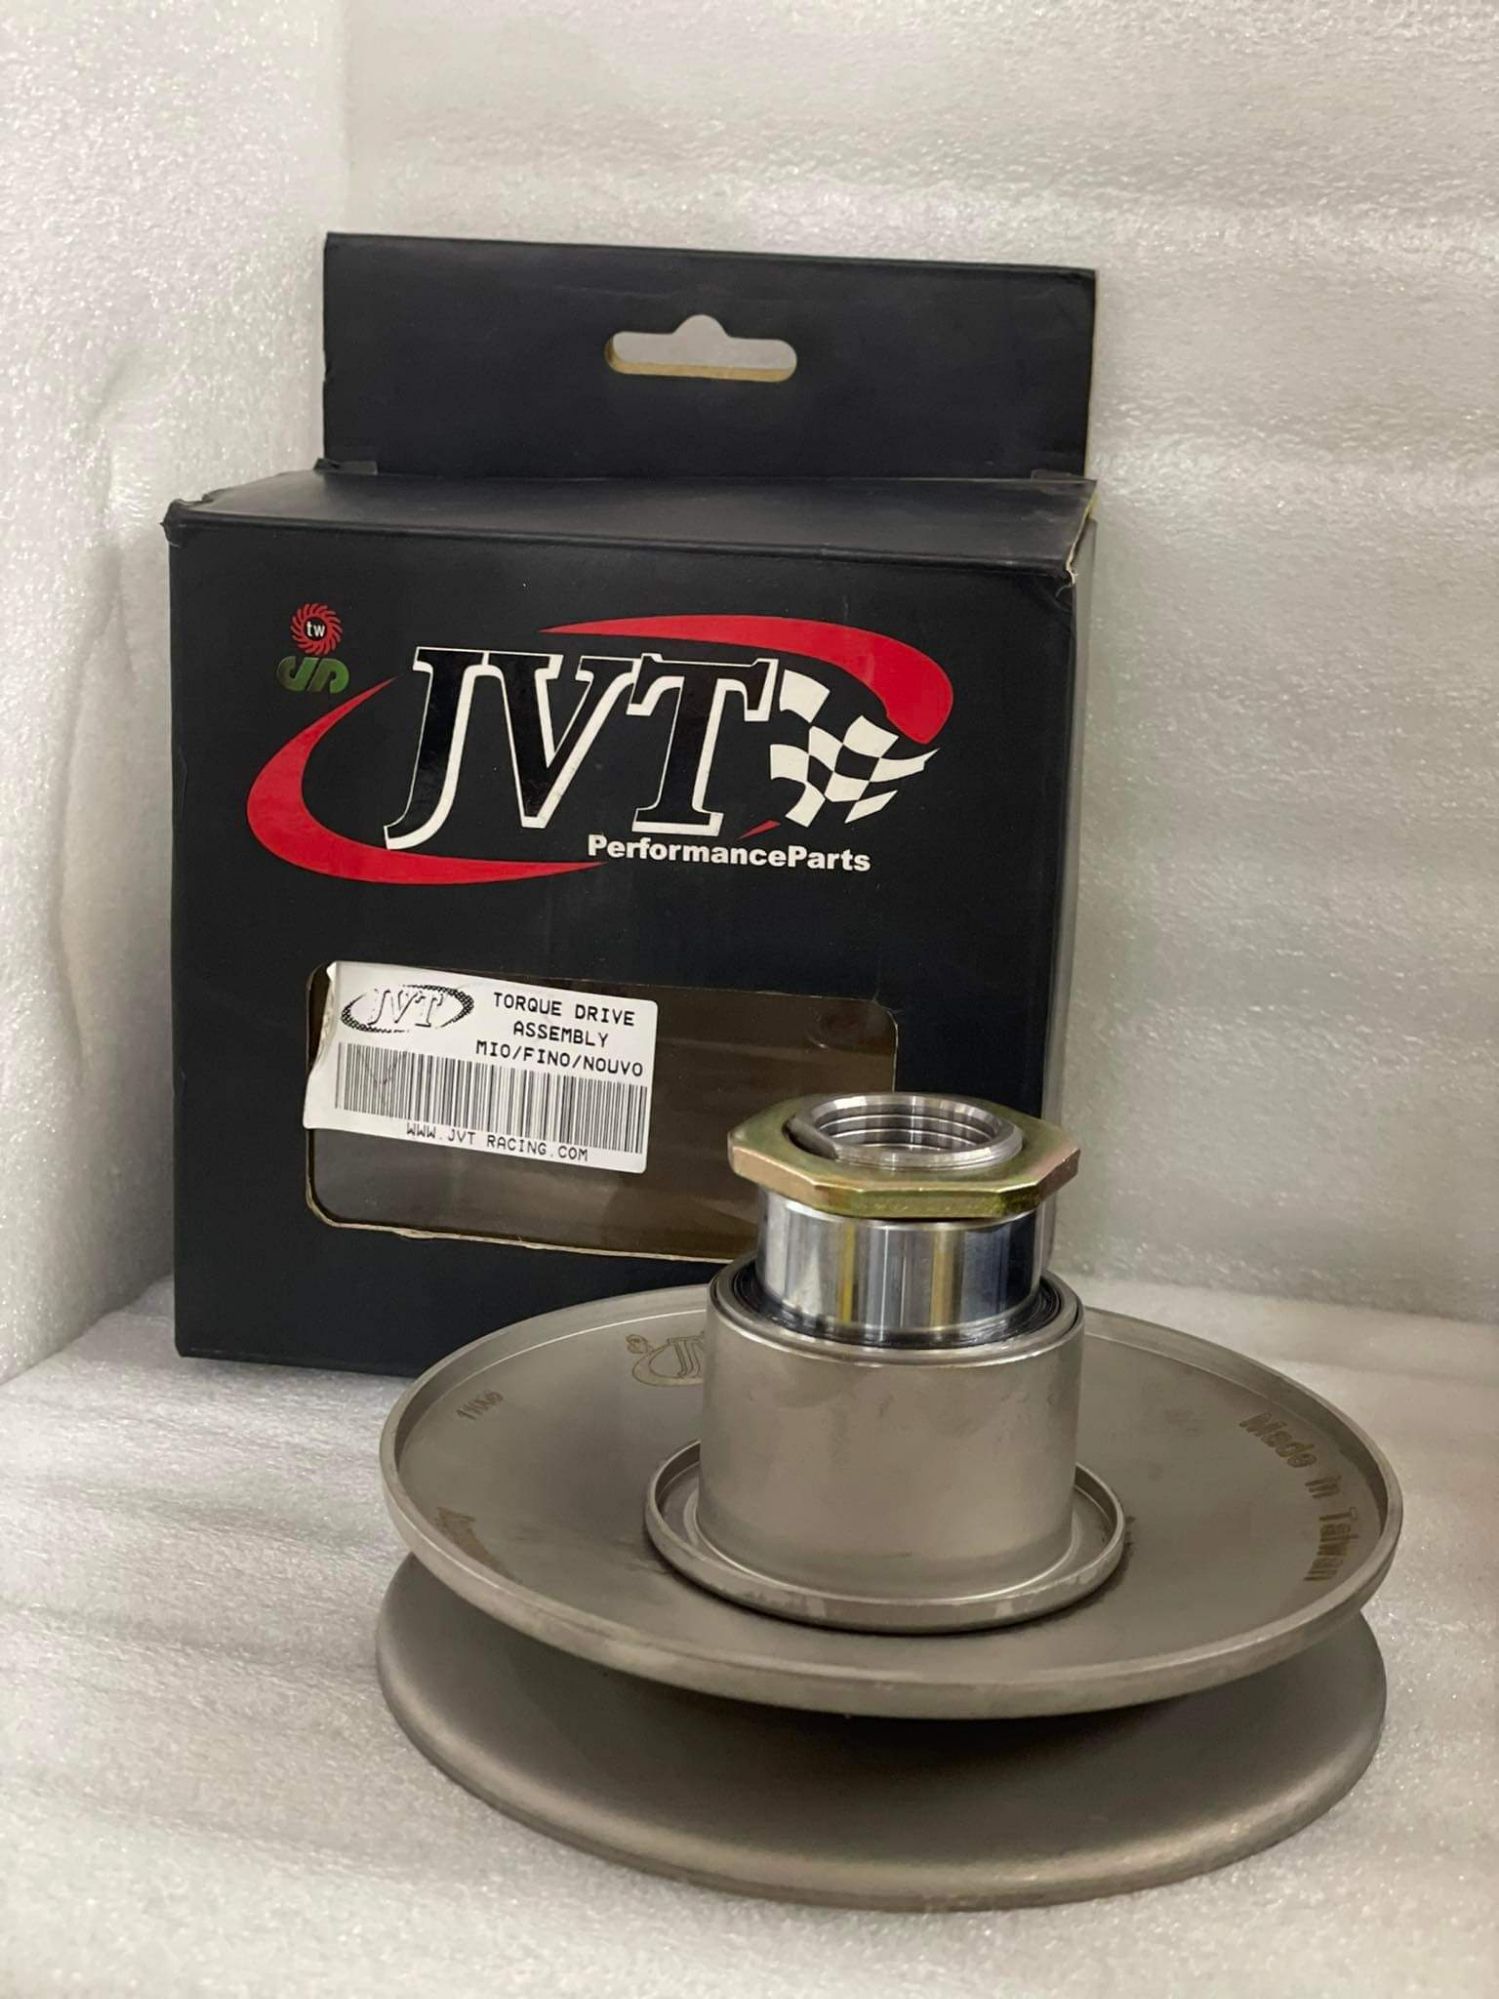 JVT Torque Drive Assembly For (Mio Sporty/Mio Soul Carb/ Mio Fino